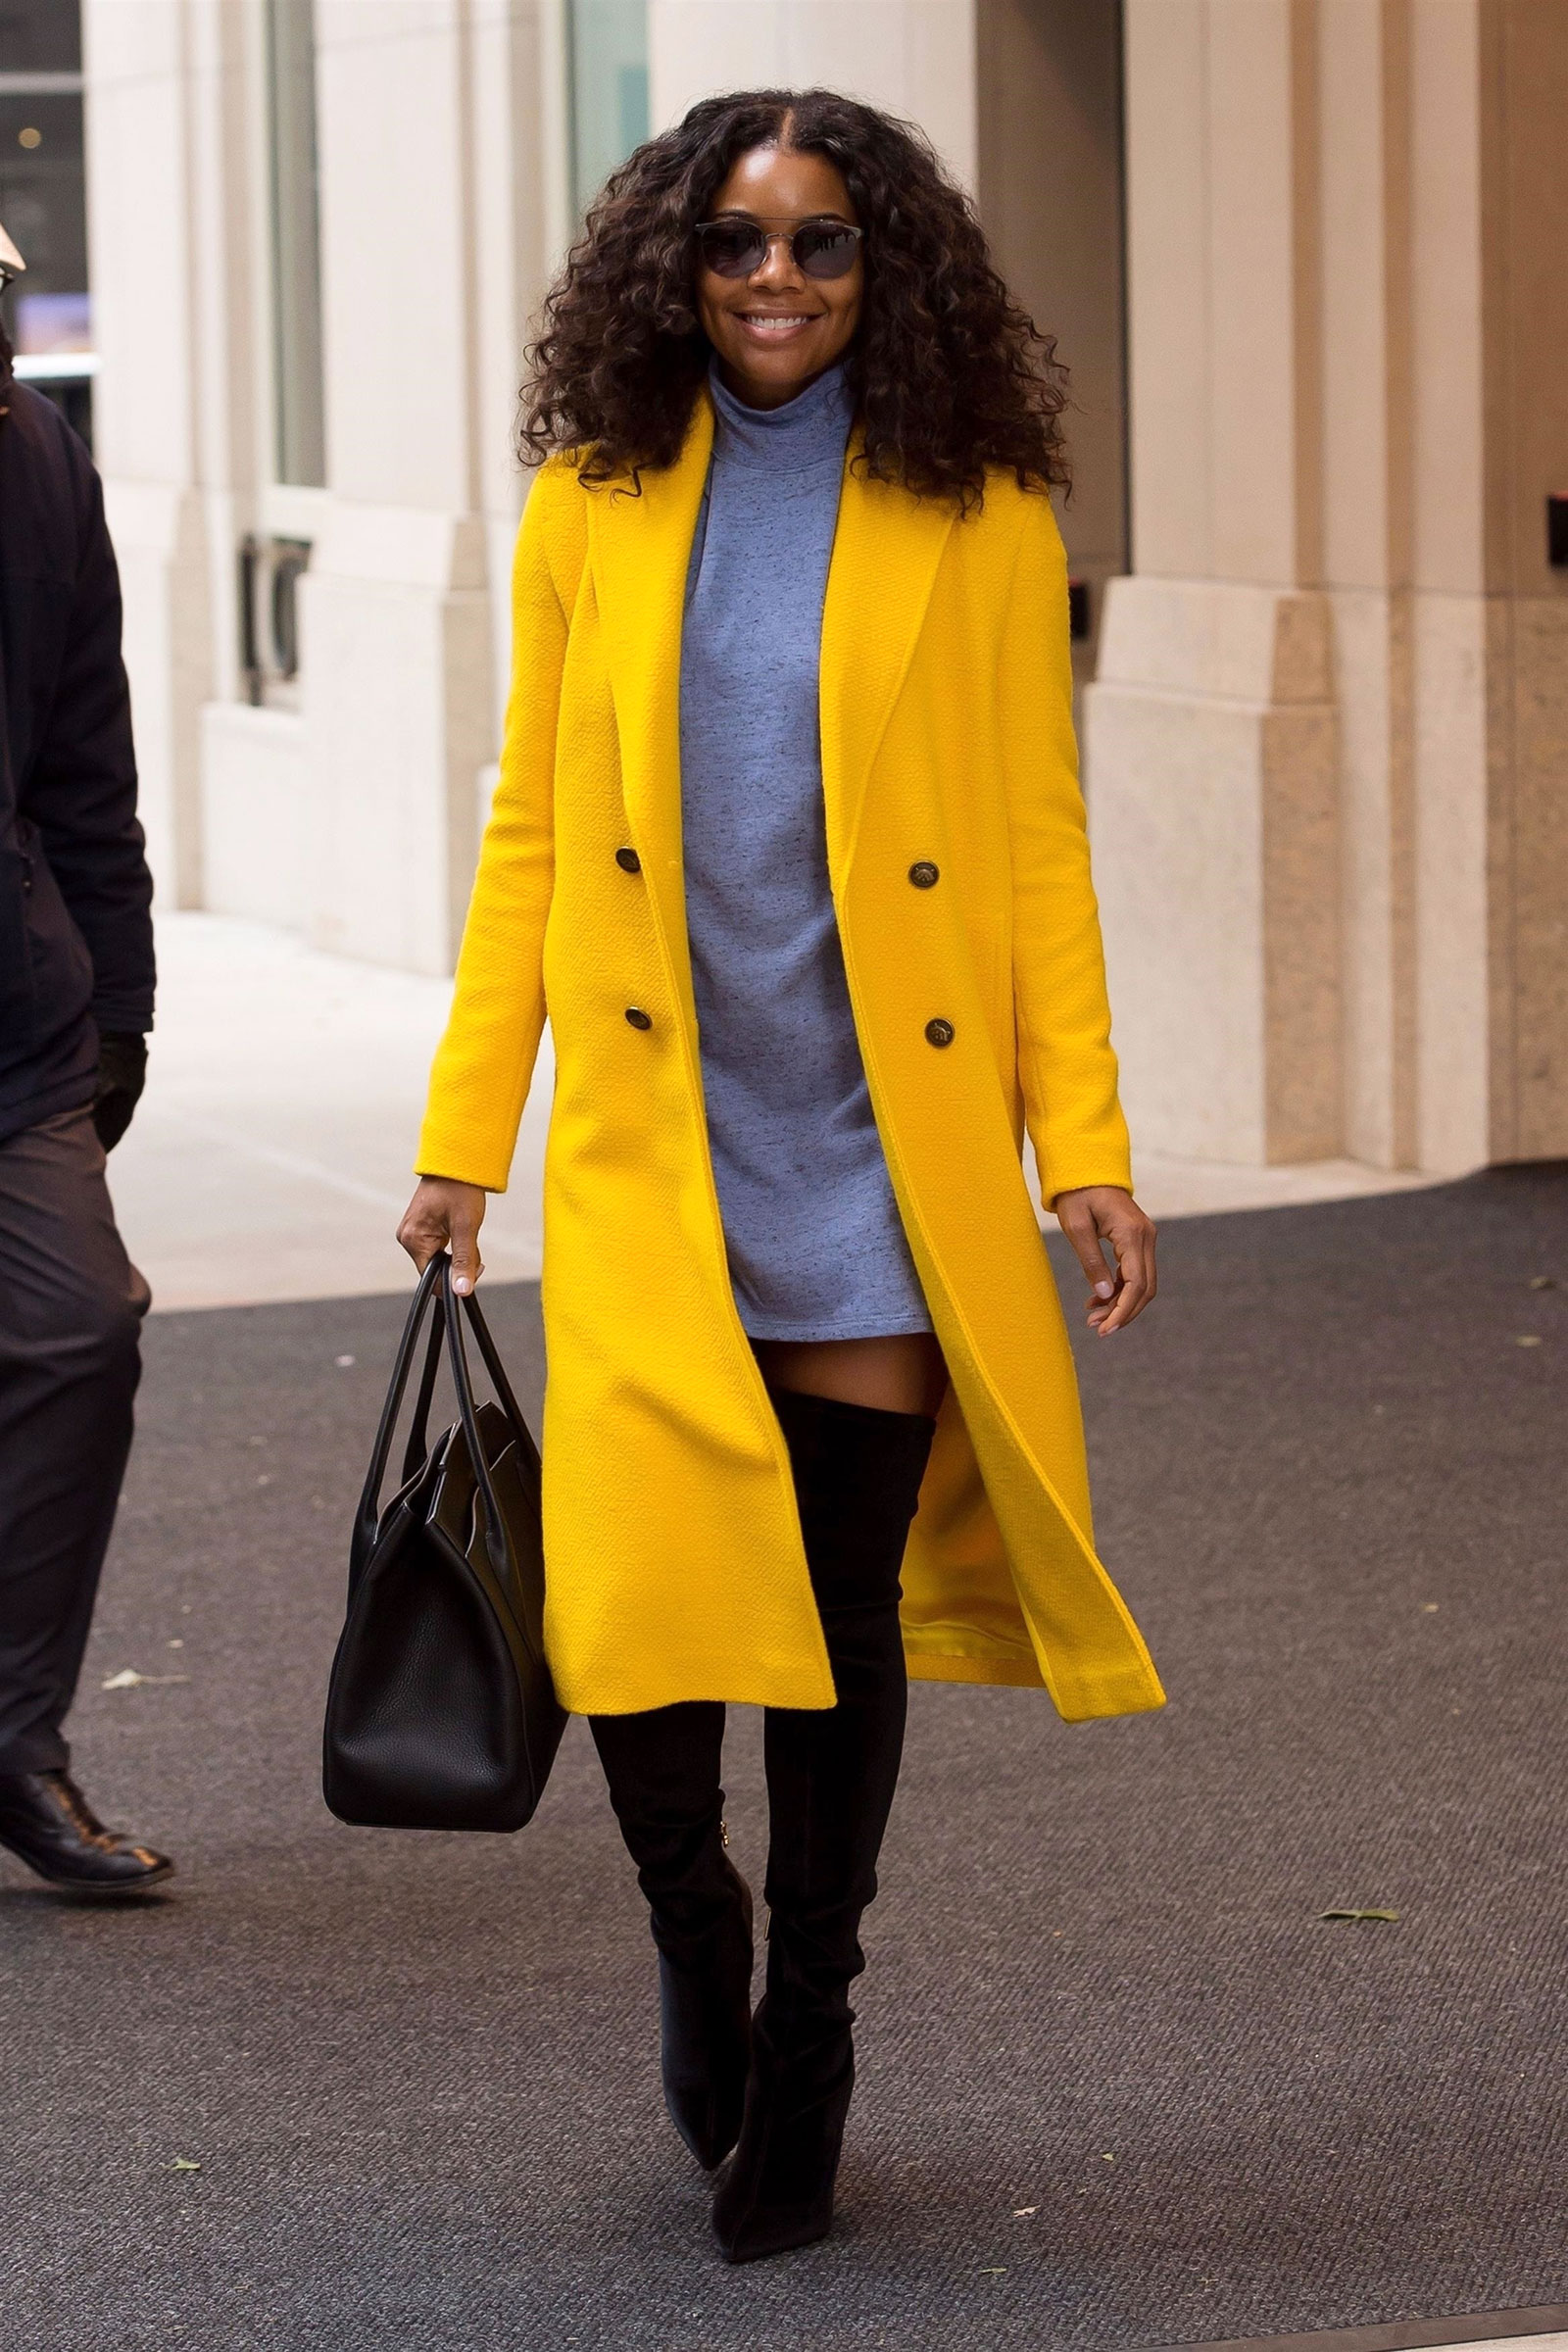 Gabrielle Union wears a bright yellow wool coat with a gray sweatedress and black over-the-knee boots.